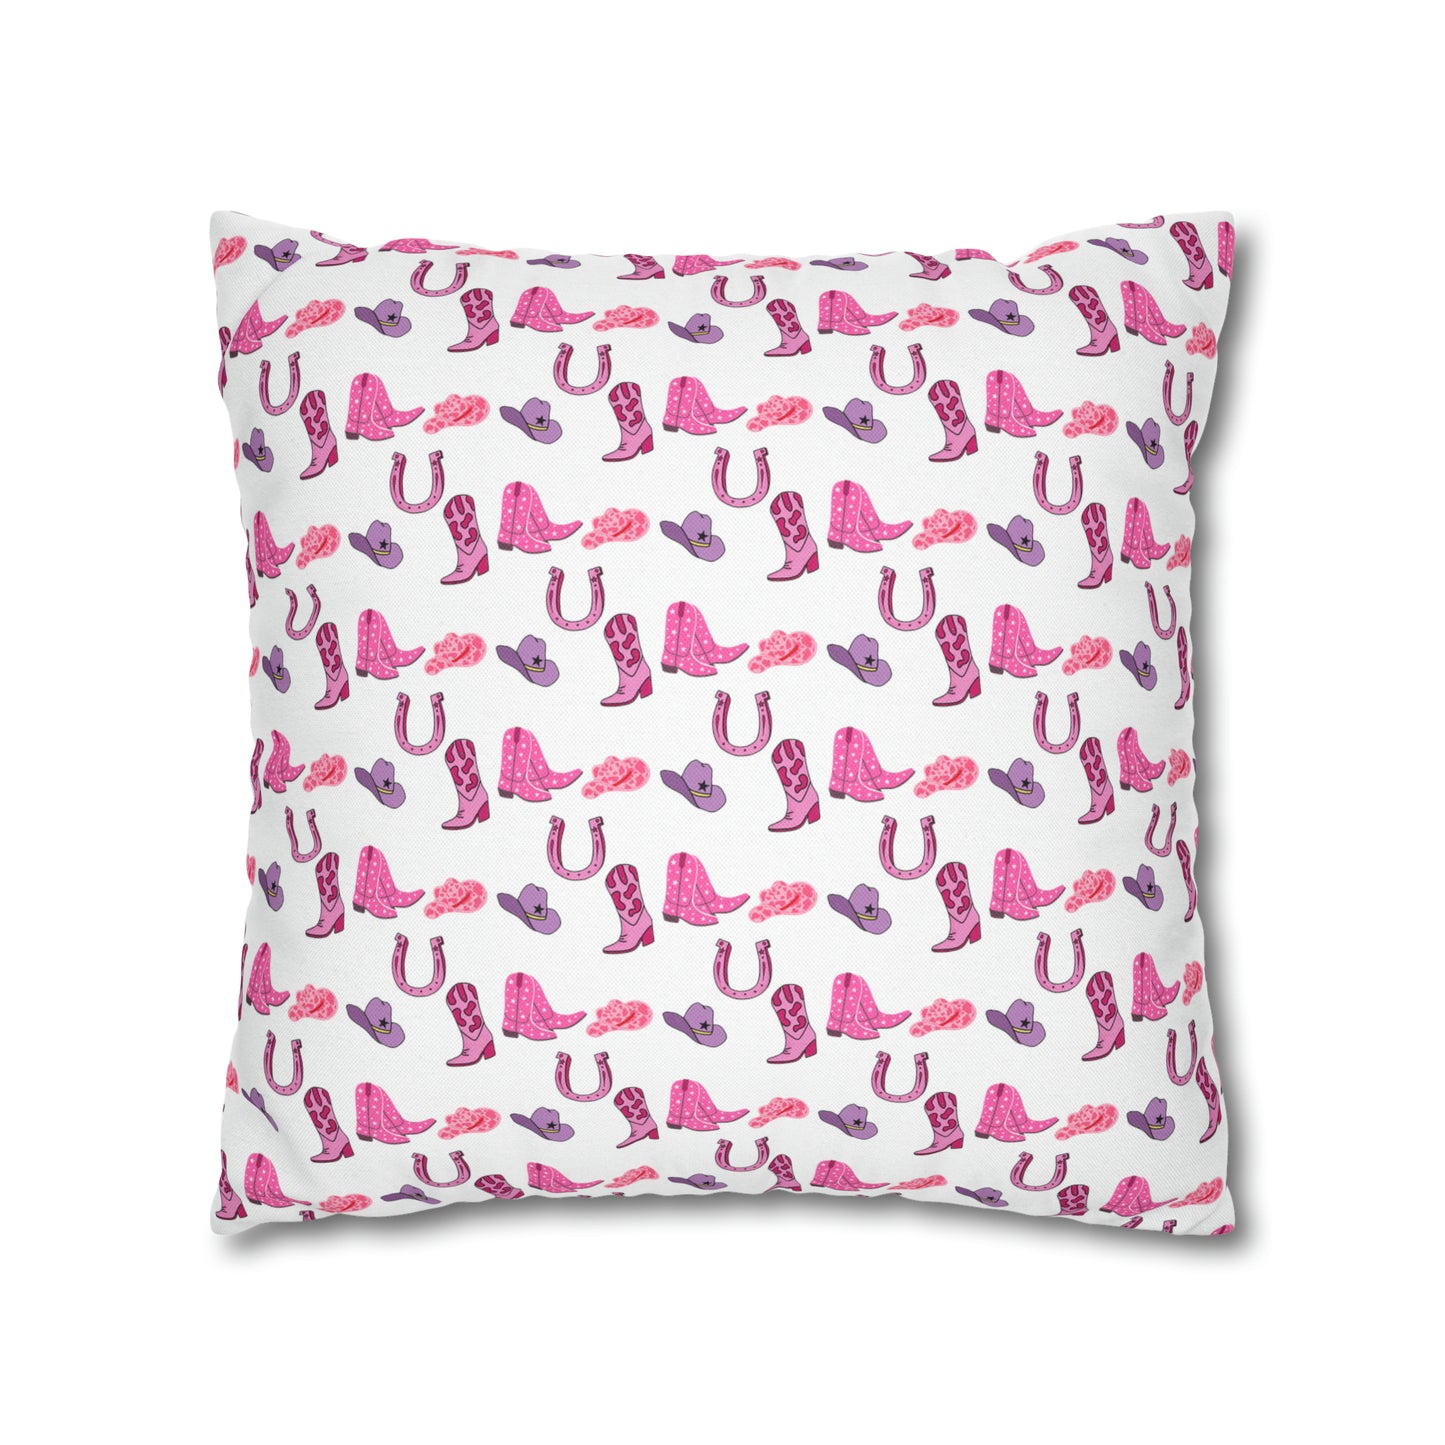 Yee Haw Pink Purple Cowgirl Hat & Boots Patterned Square Pillow Cover Multiple Sizes